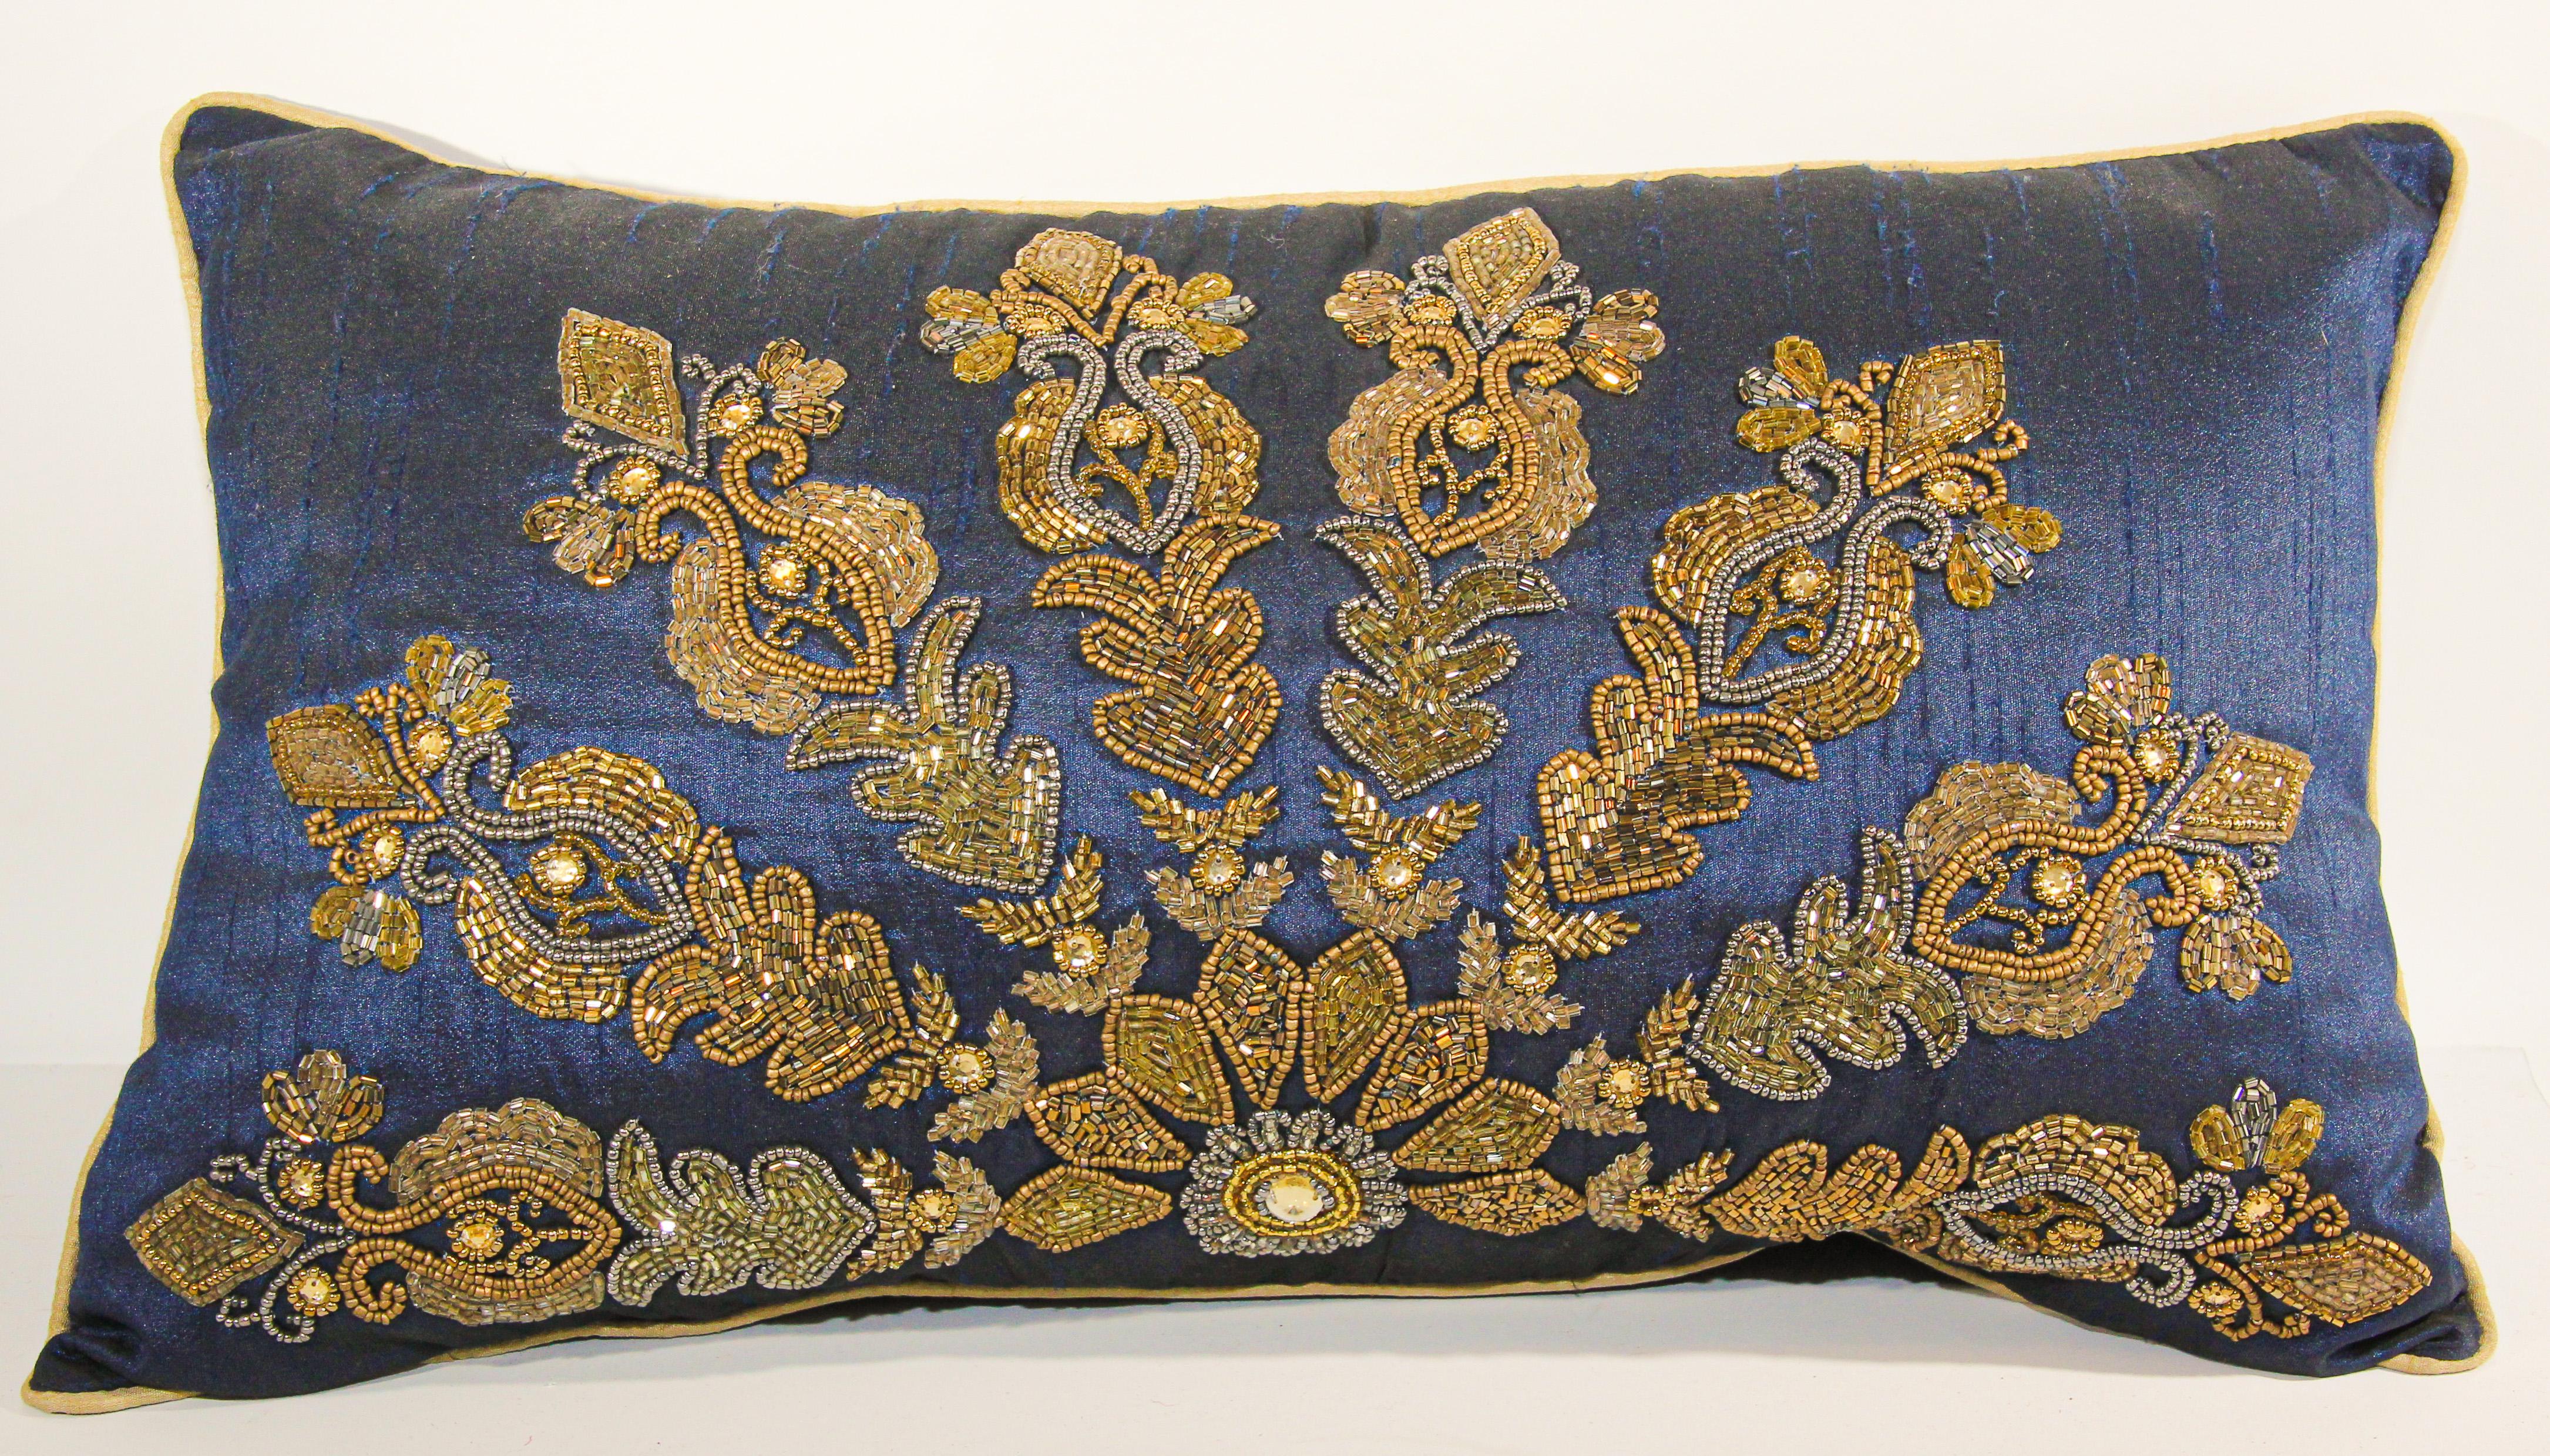 Mughal India royal blue Dupioni silk throw pillow embroidered with gold beads in a peacock style design.
Vintage lumbar decorative silk blue throw pillow handcrafted with gold beads and sequins.
Handcrafted luxury throw pillow.
Measures: 10